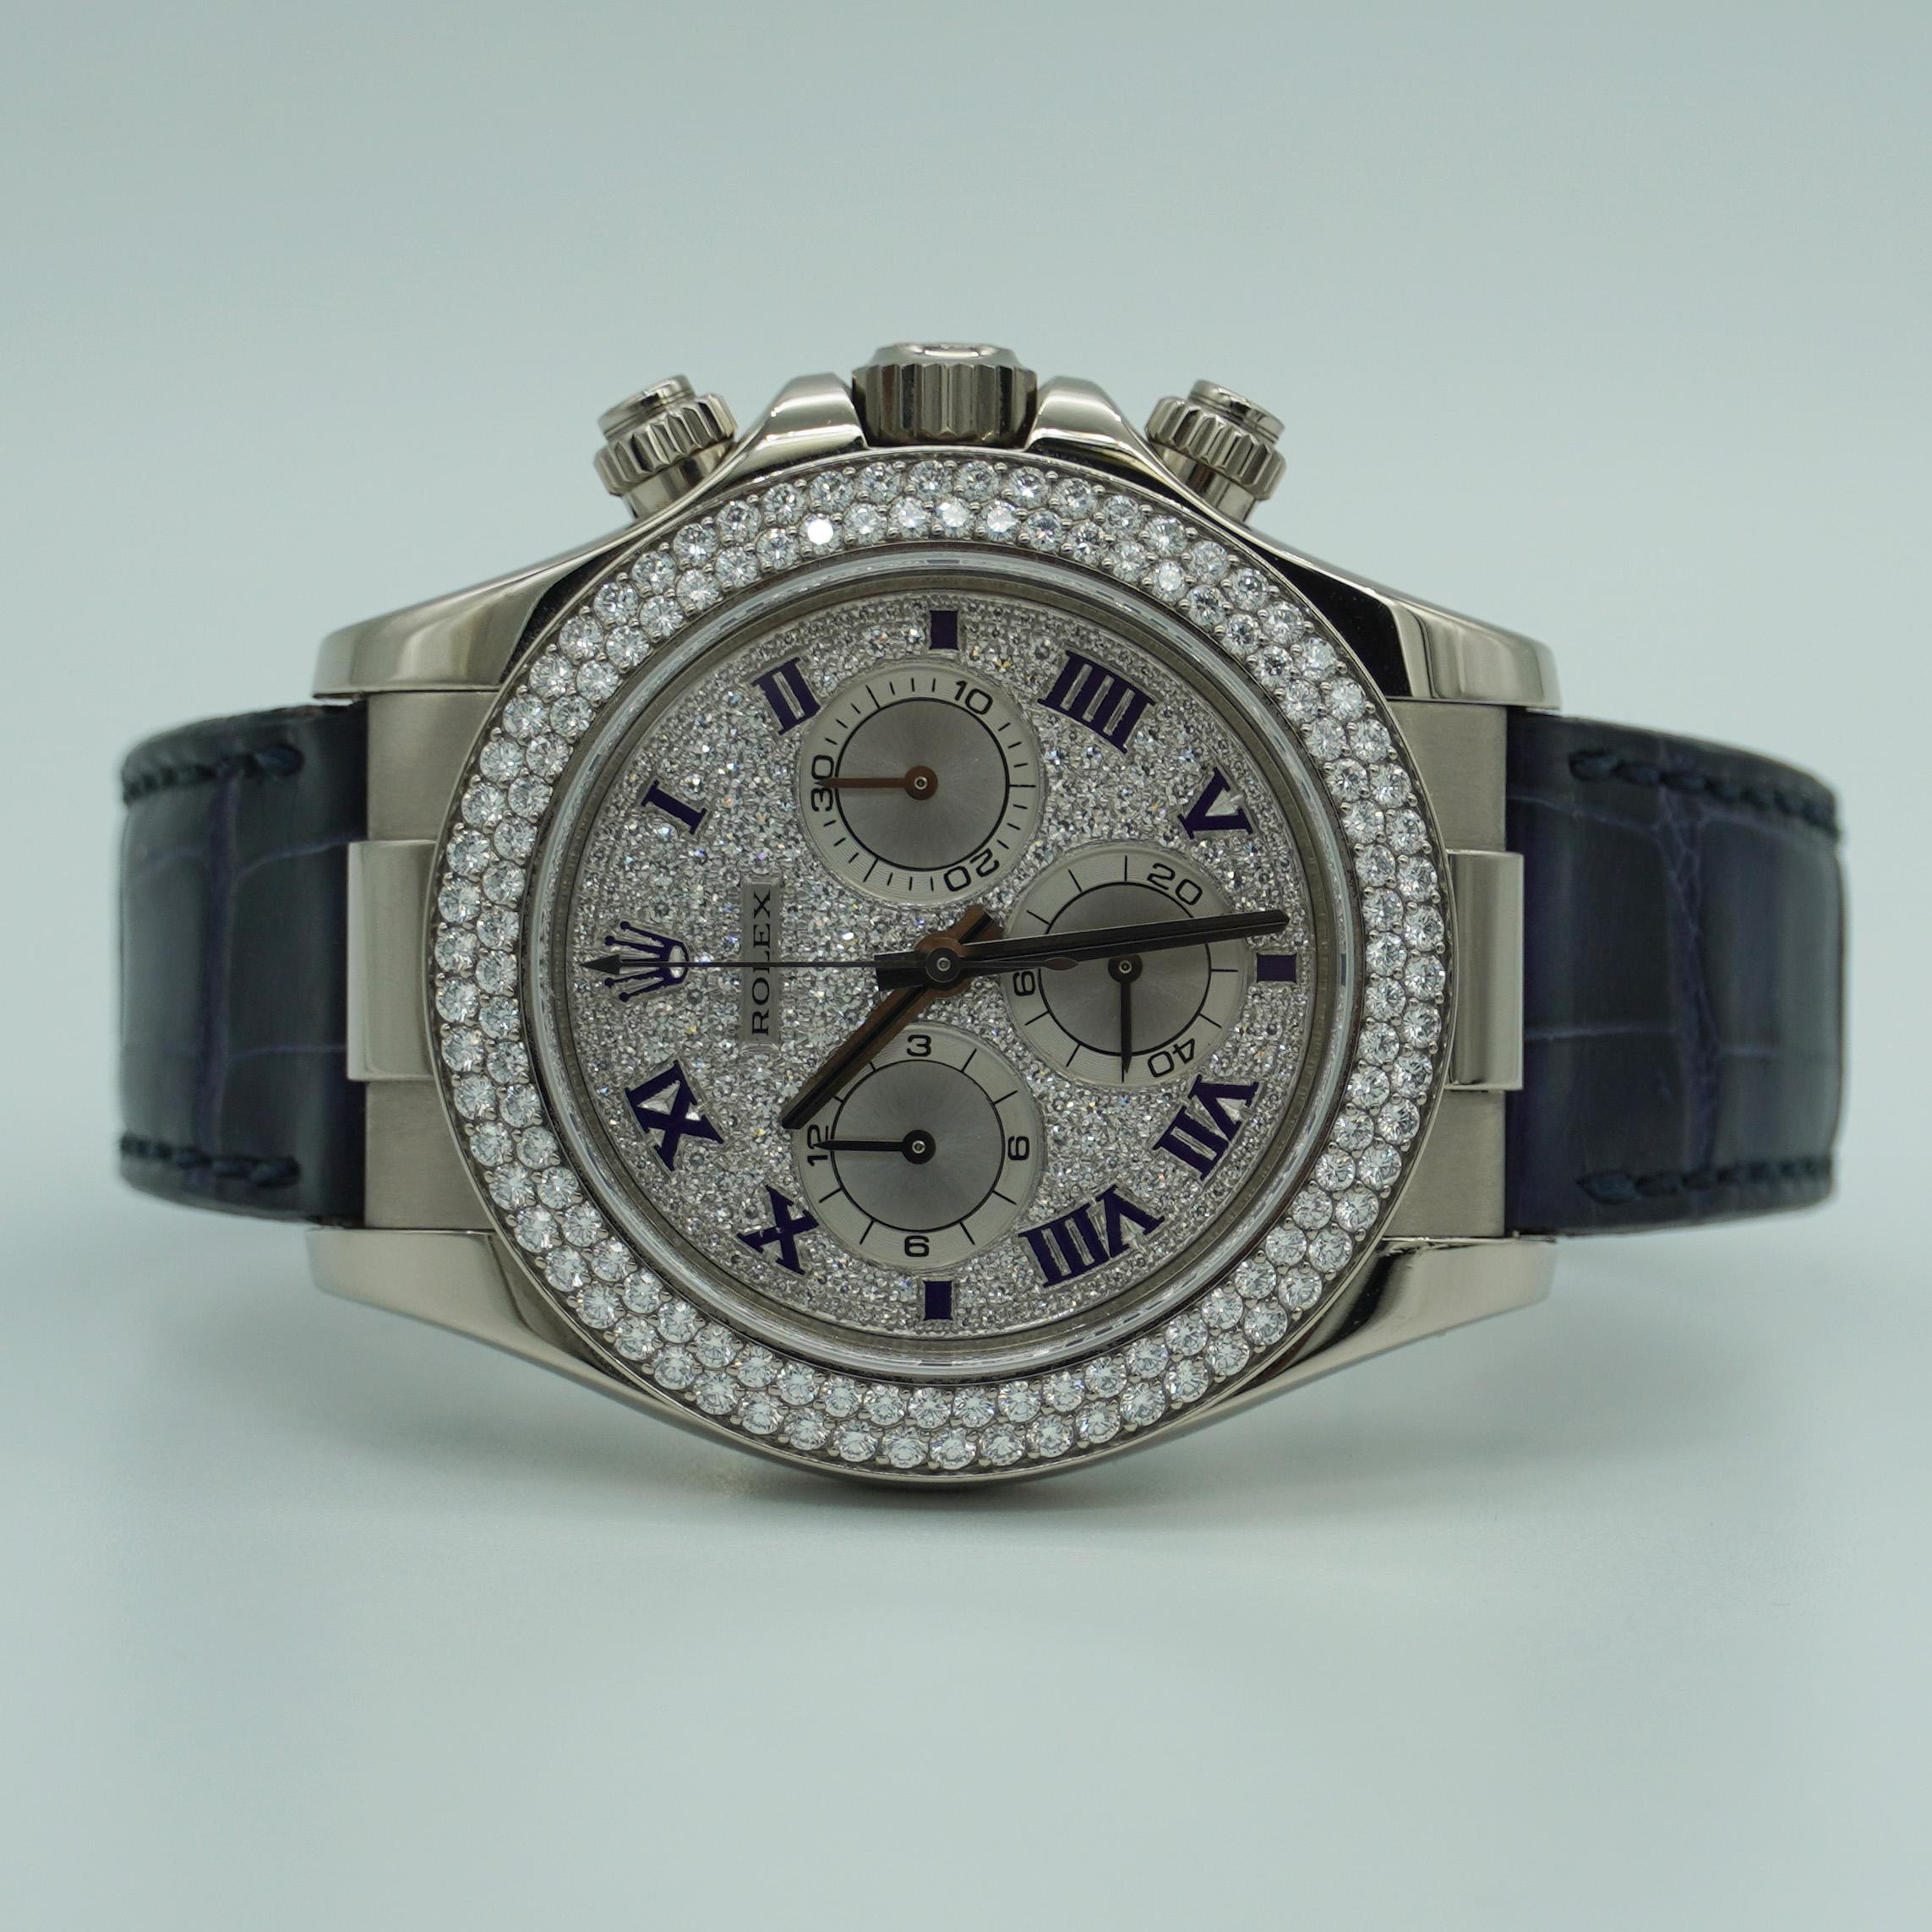 Rolex Daytona, 116589 40mm 18k White Gold Factory Diamond Dial. The Timepiece is powered by an automatic movement and features: 18k White Gold round case and clasp, and two-piece Alligator Navy Blue leather strap. Fixed Diamond Bezel. Pave diamond